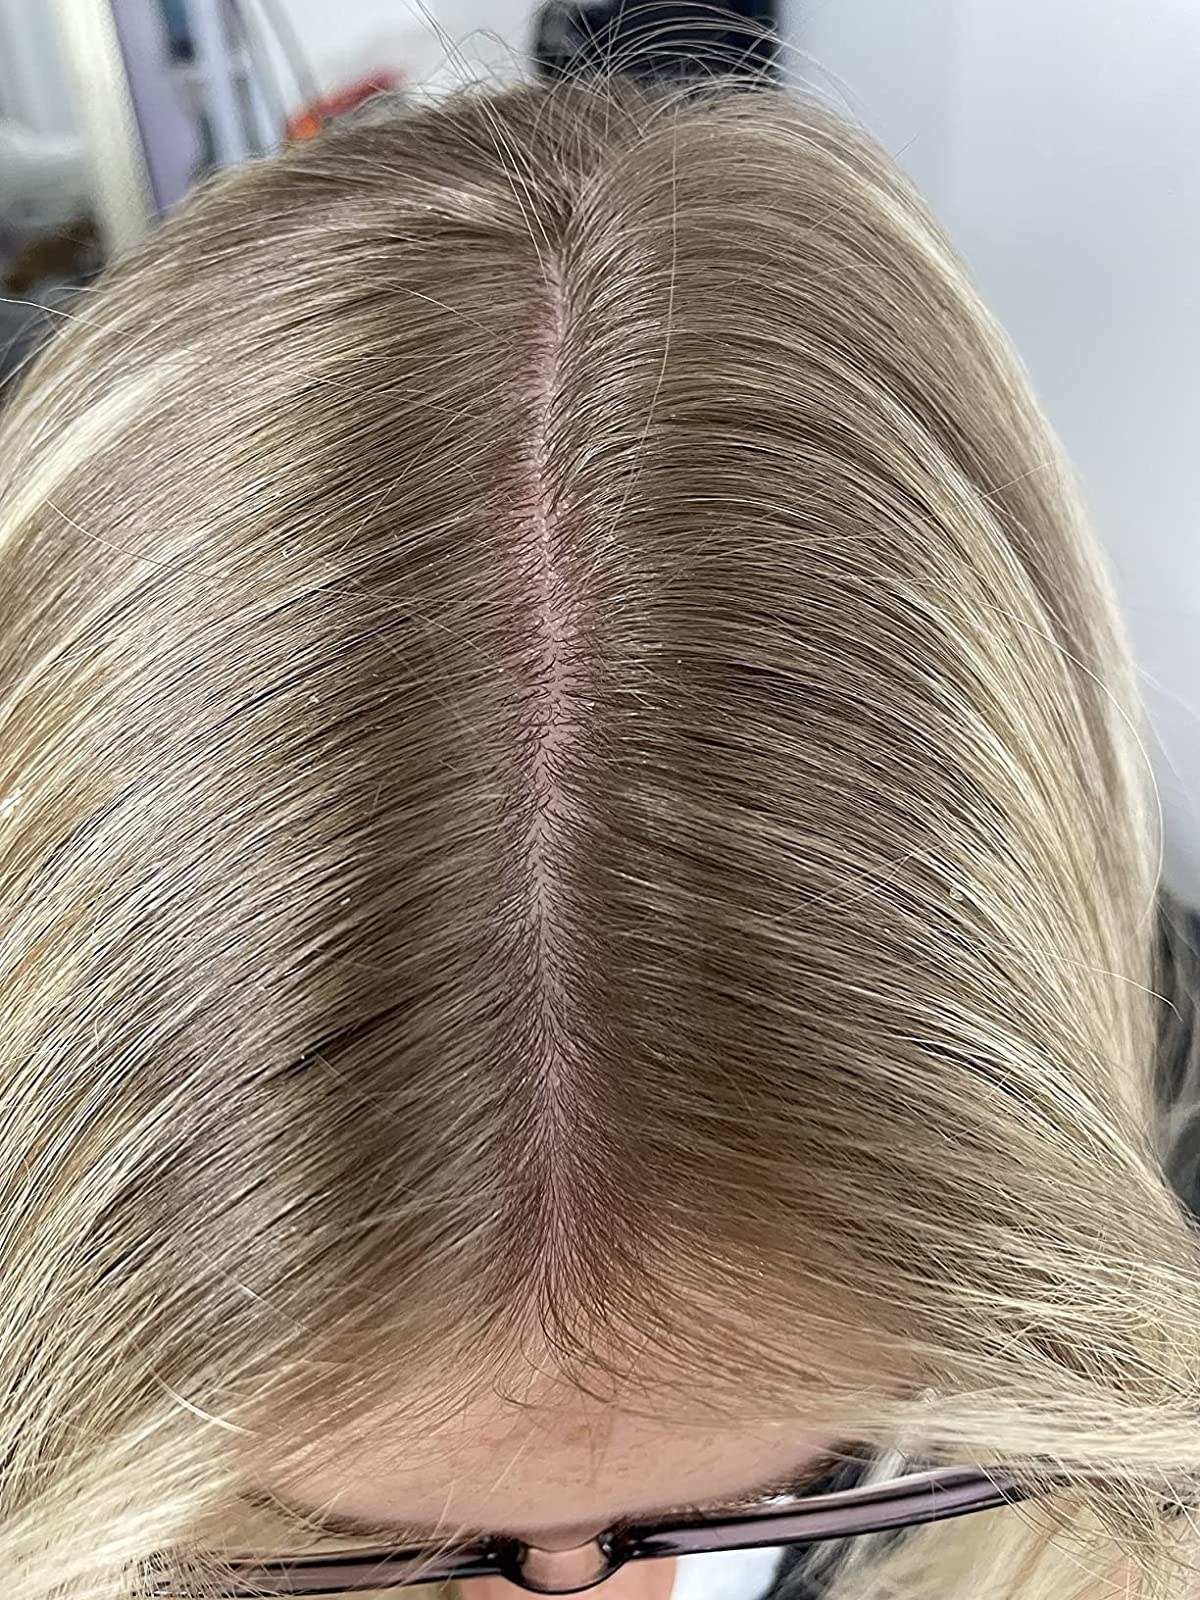 Reviewer showing their scalp after using the anti-dandruff shampoo